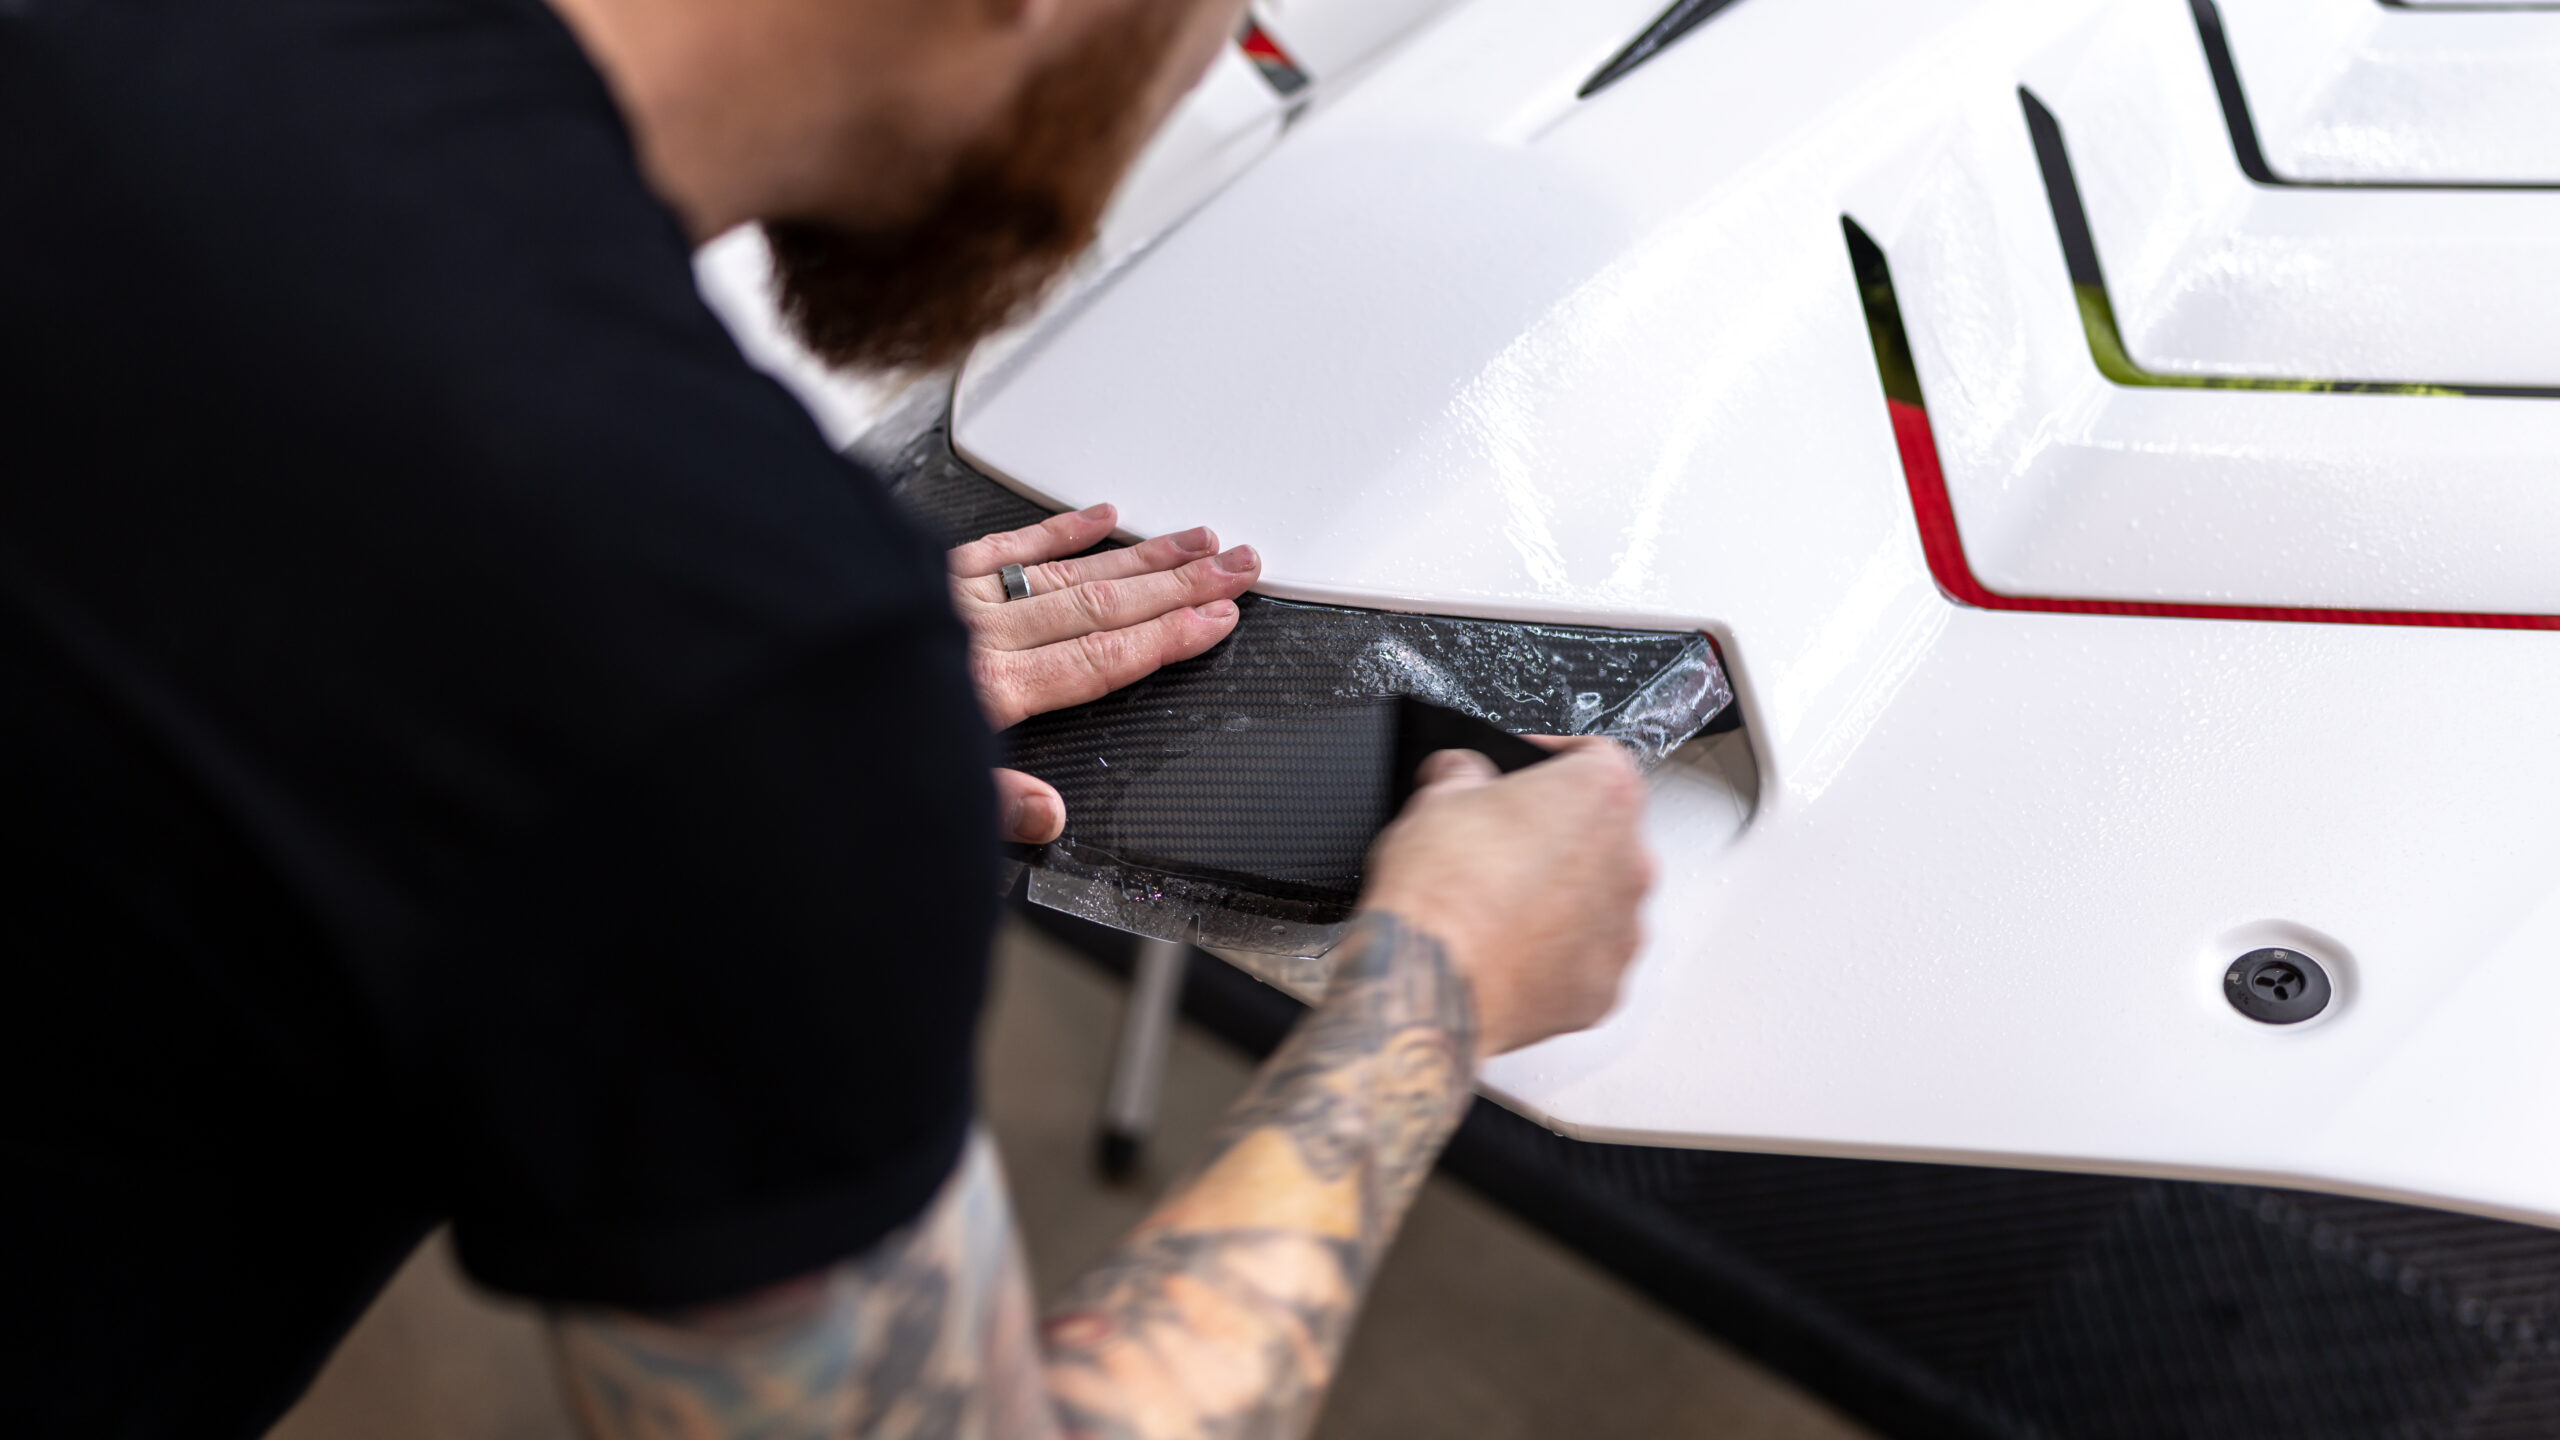 Applying XPEL Stealth PPF to the carbon fiber roof scoop on the engine cover of this Lamborghini Huracan STO